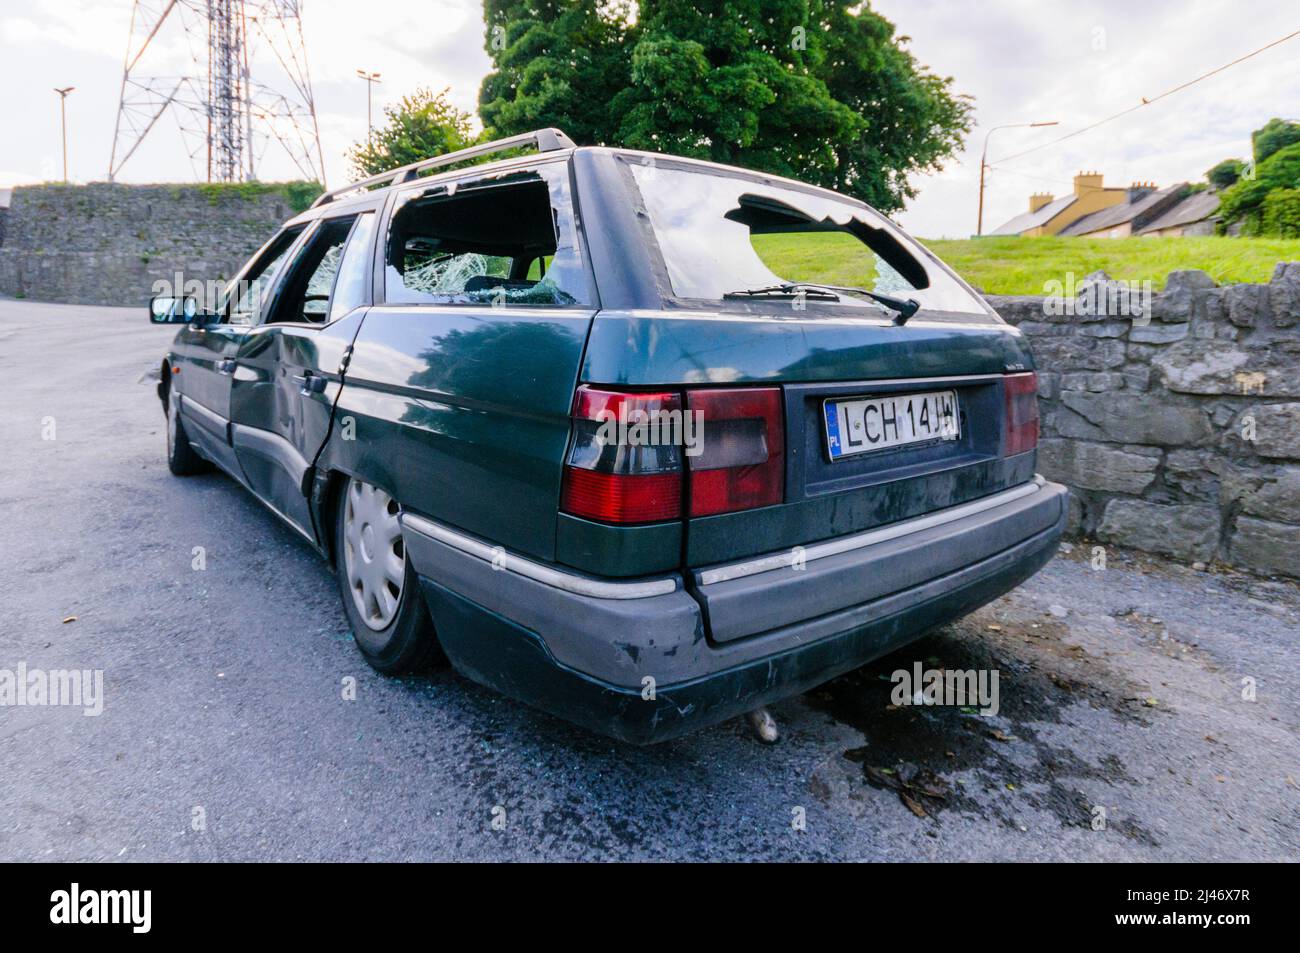 Ballinrobe, County Mayo, Republic of Ireland. 1st July 2008. A car belonging to a Polish family is smashed up in a racist attack. Stock Photo